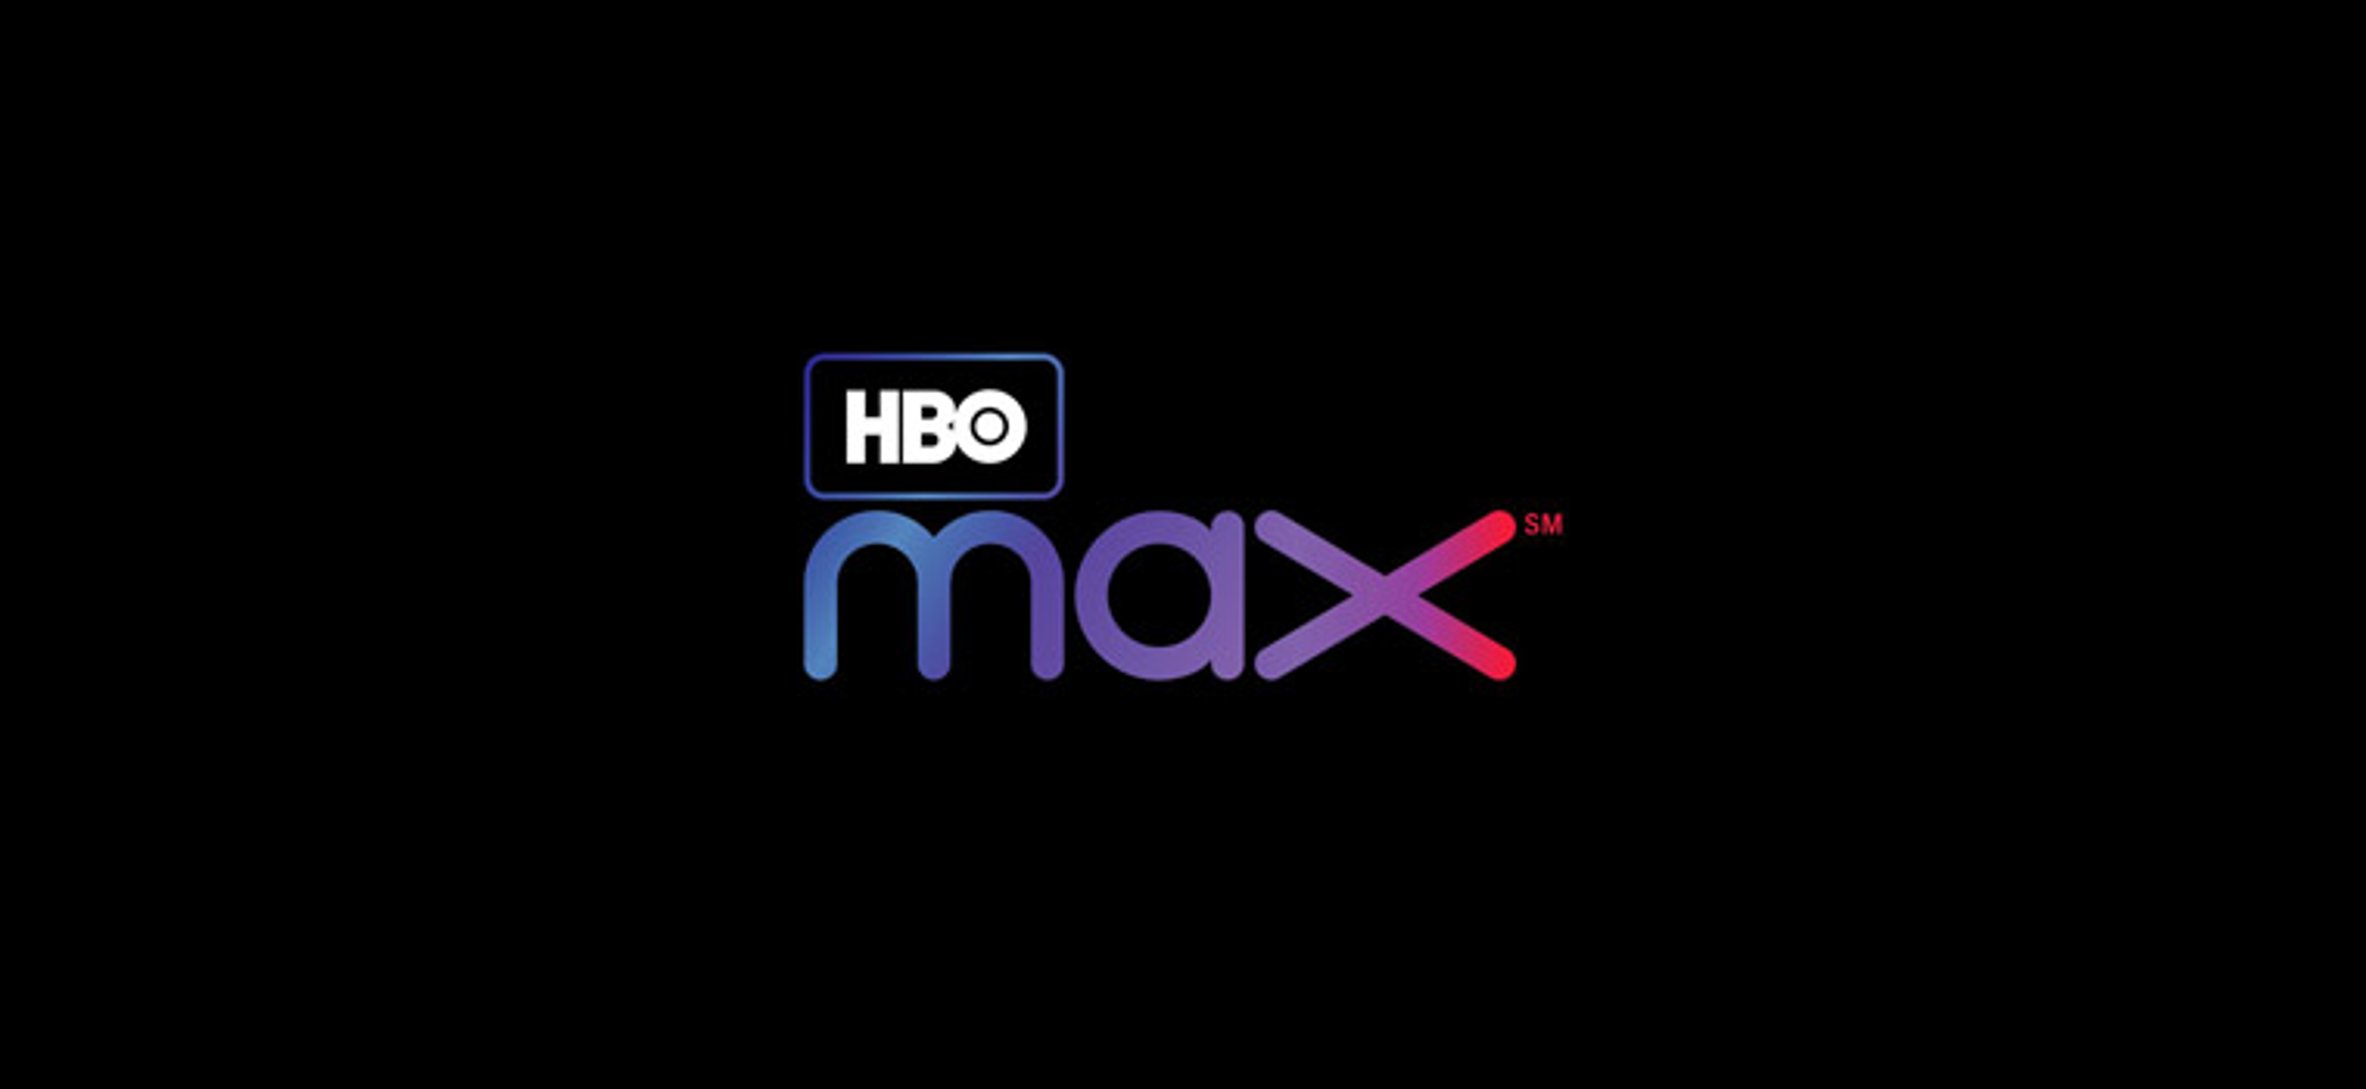 HBO Max's New Series: 'RAP SH!T' created by Issa Rae